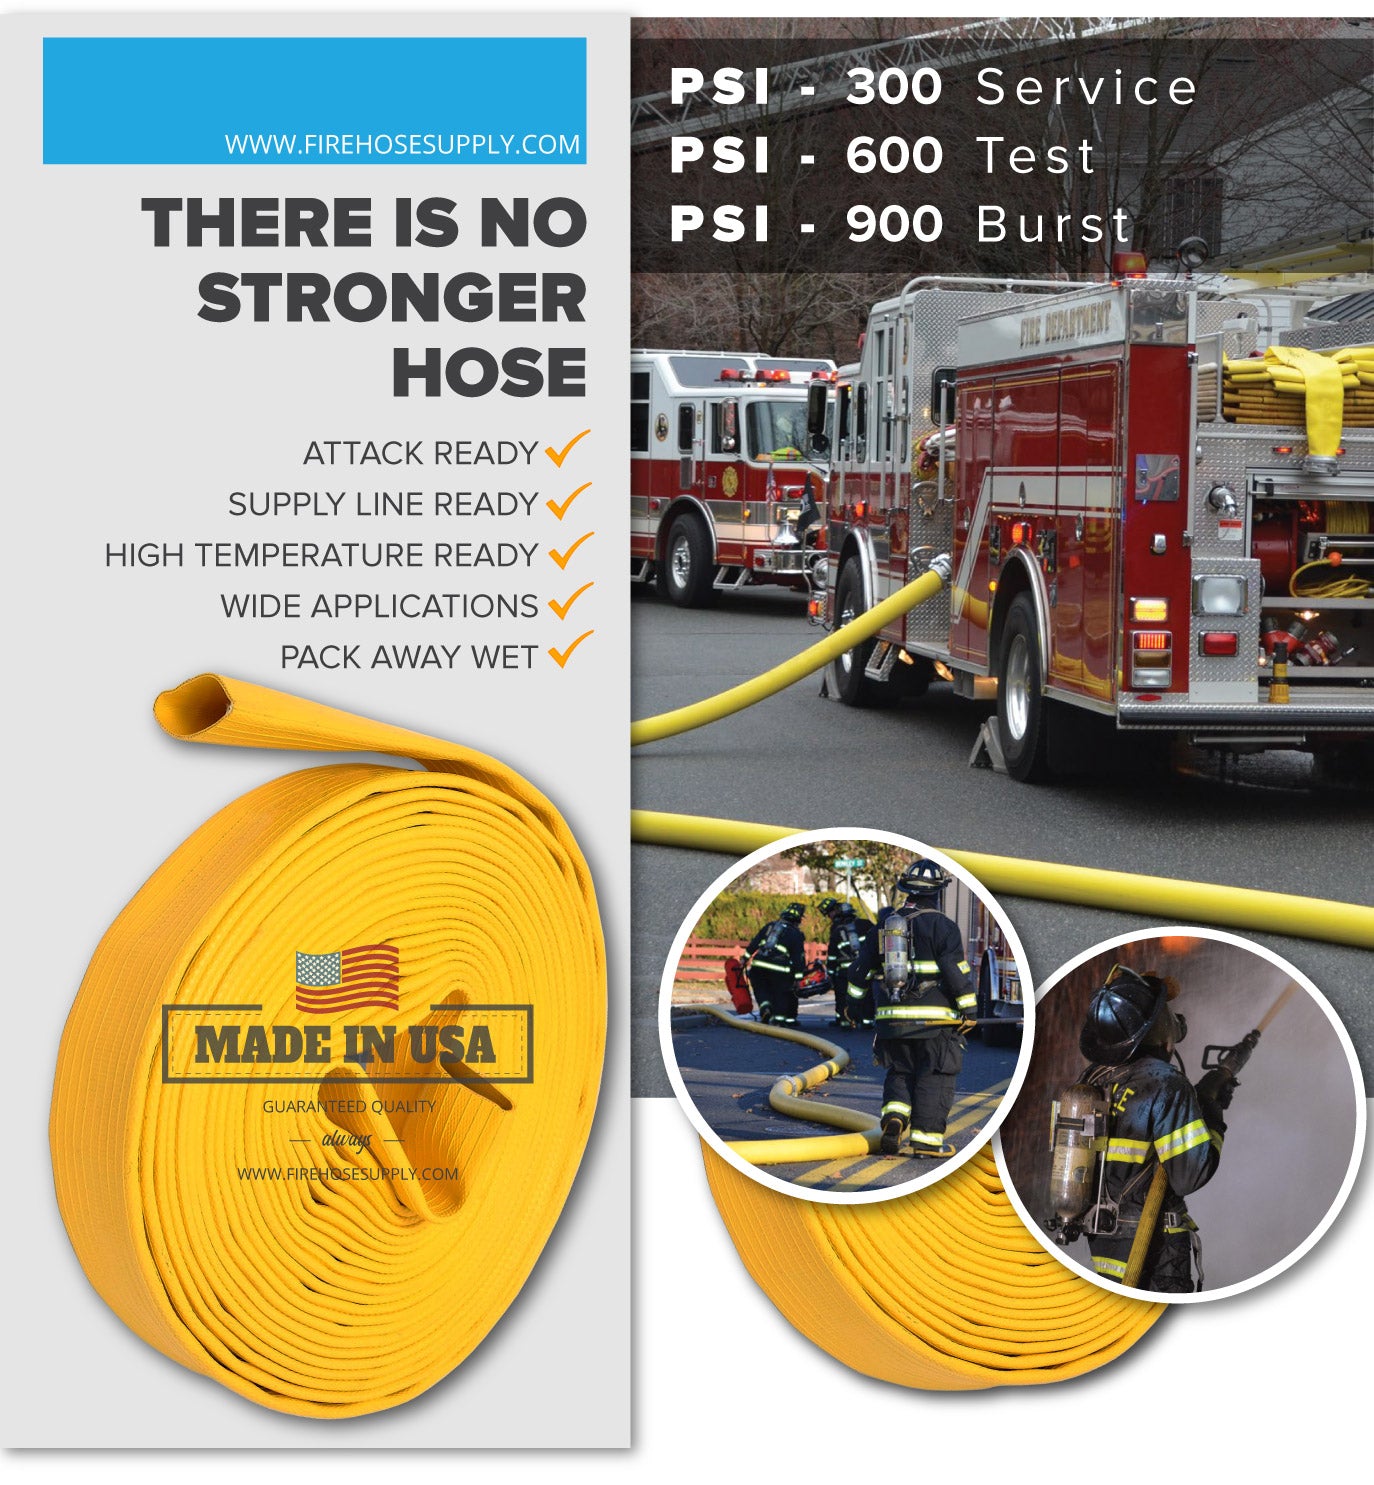 2.5 Inch Rubber Fire Hose Material Only Supply And Attack Ready Firefighter Yellow 600 PSI Test